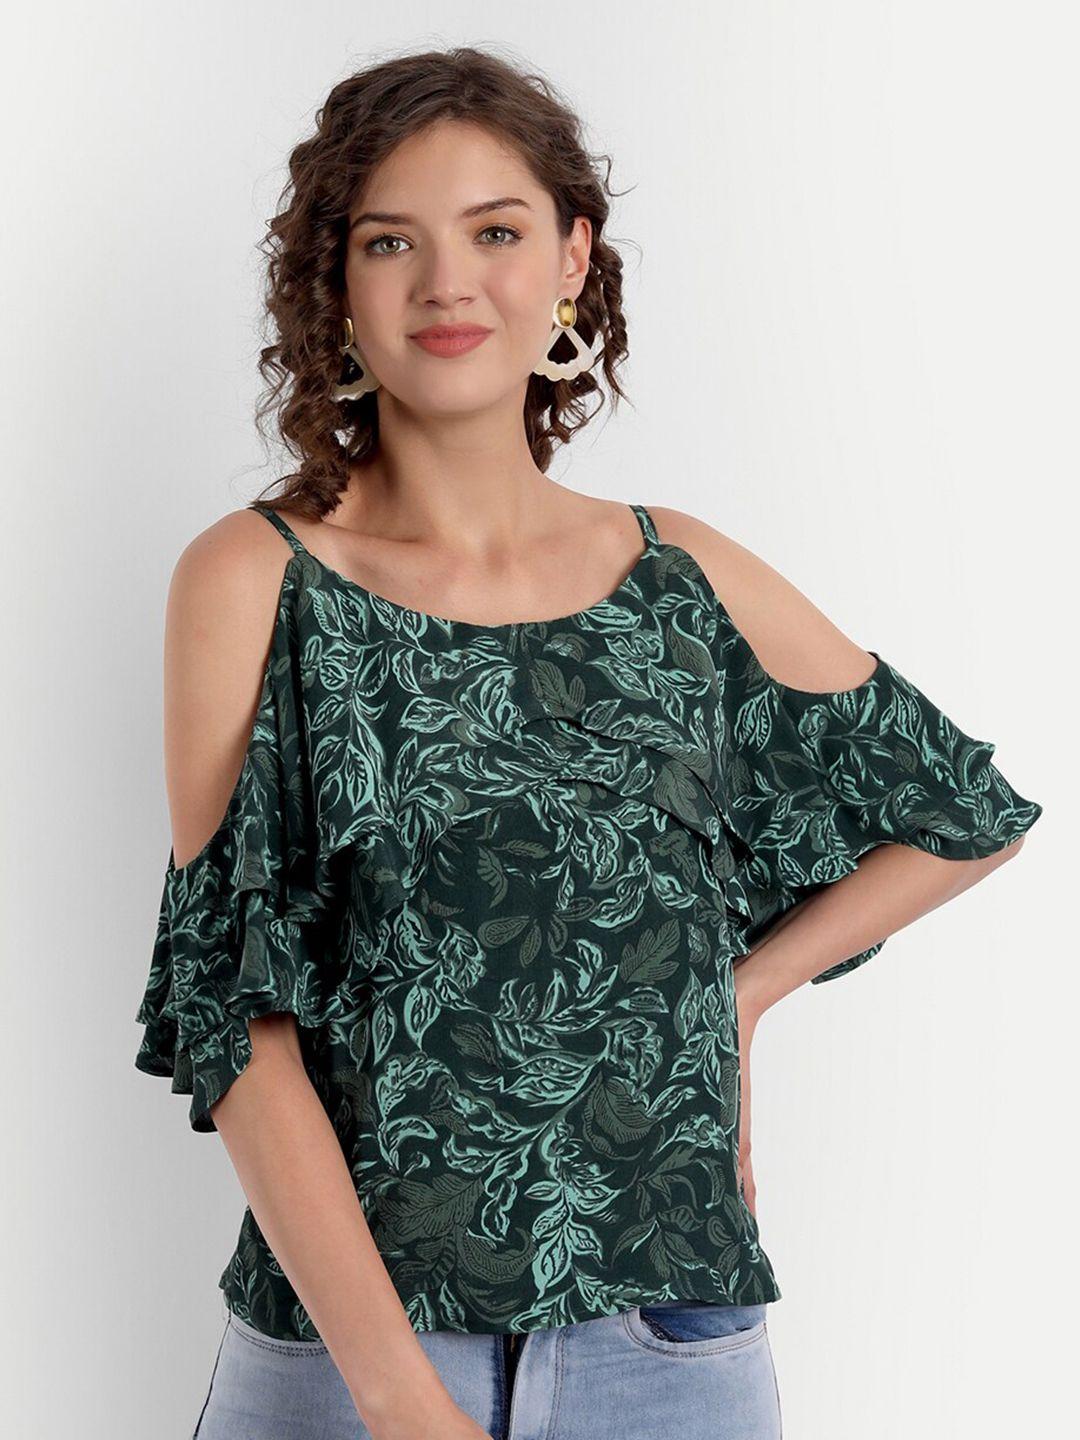 parassio clothings women green floral print georgette top